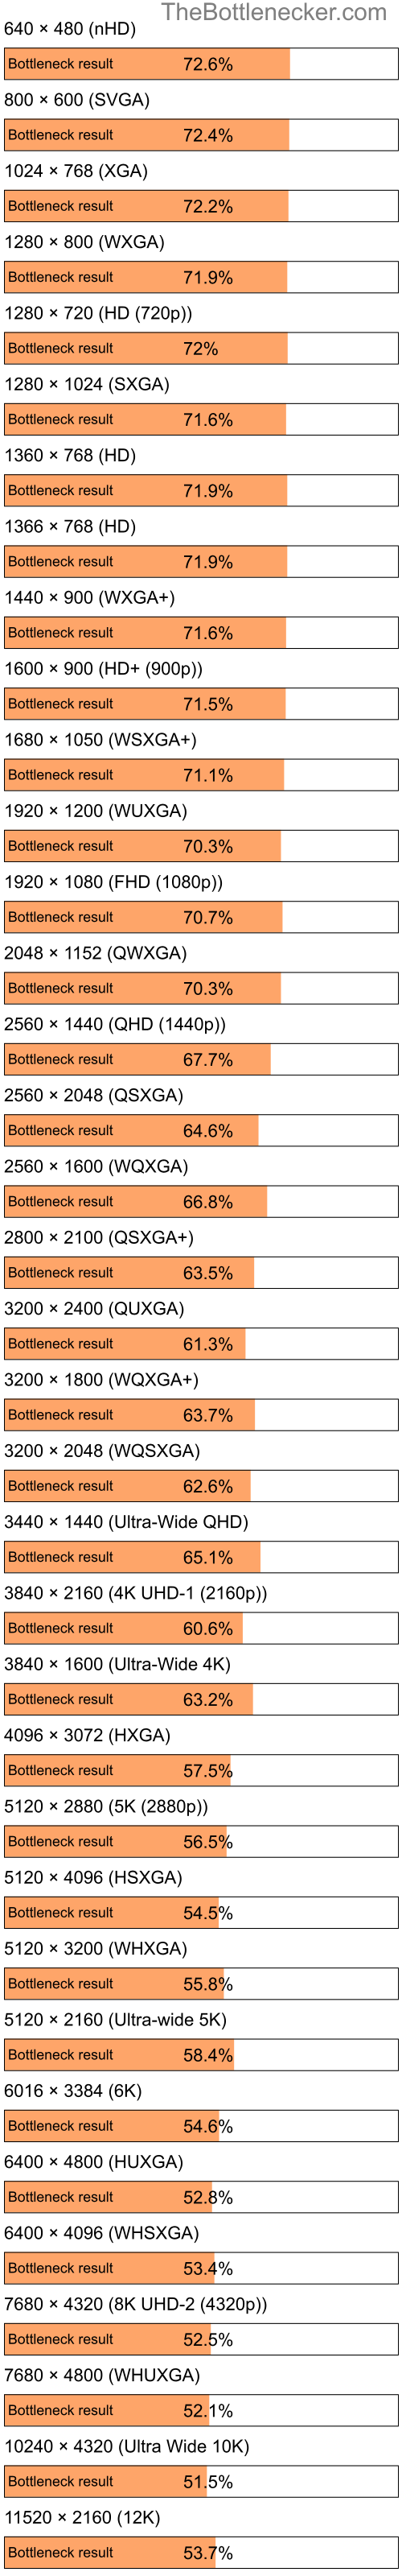 Bottleneck results by resolution for AMD Phenom II X4 970 and NVIDIA GeForce RTX 3080 Ti in General Tasks